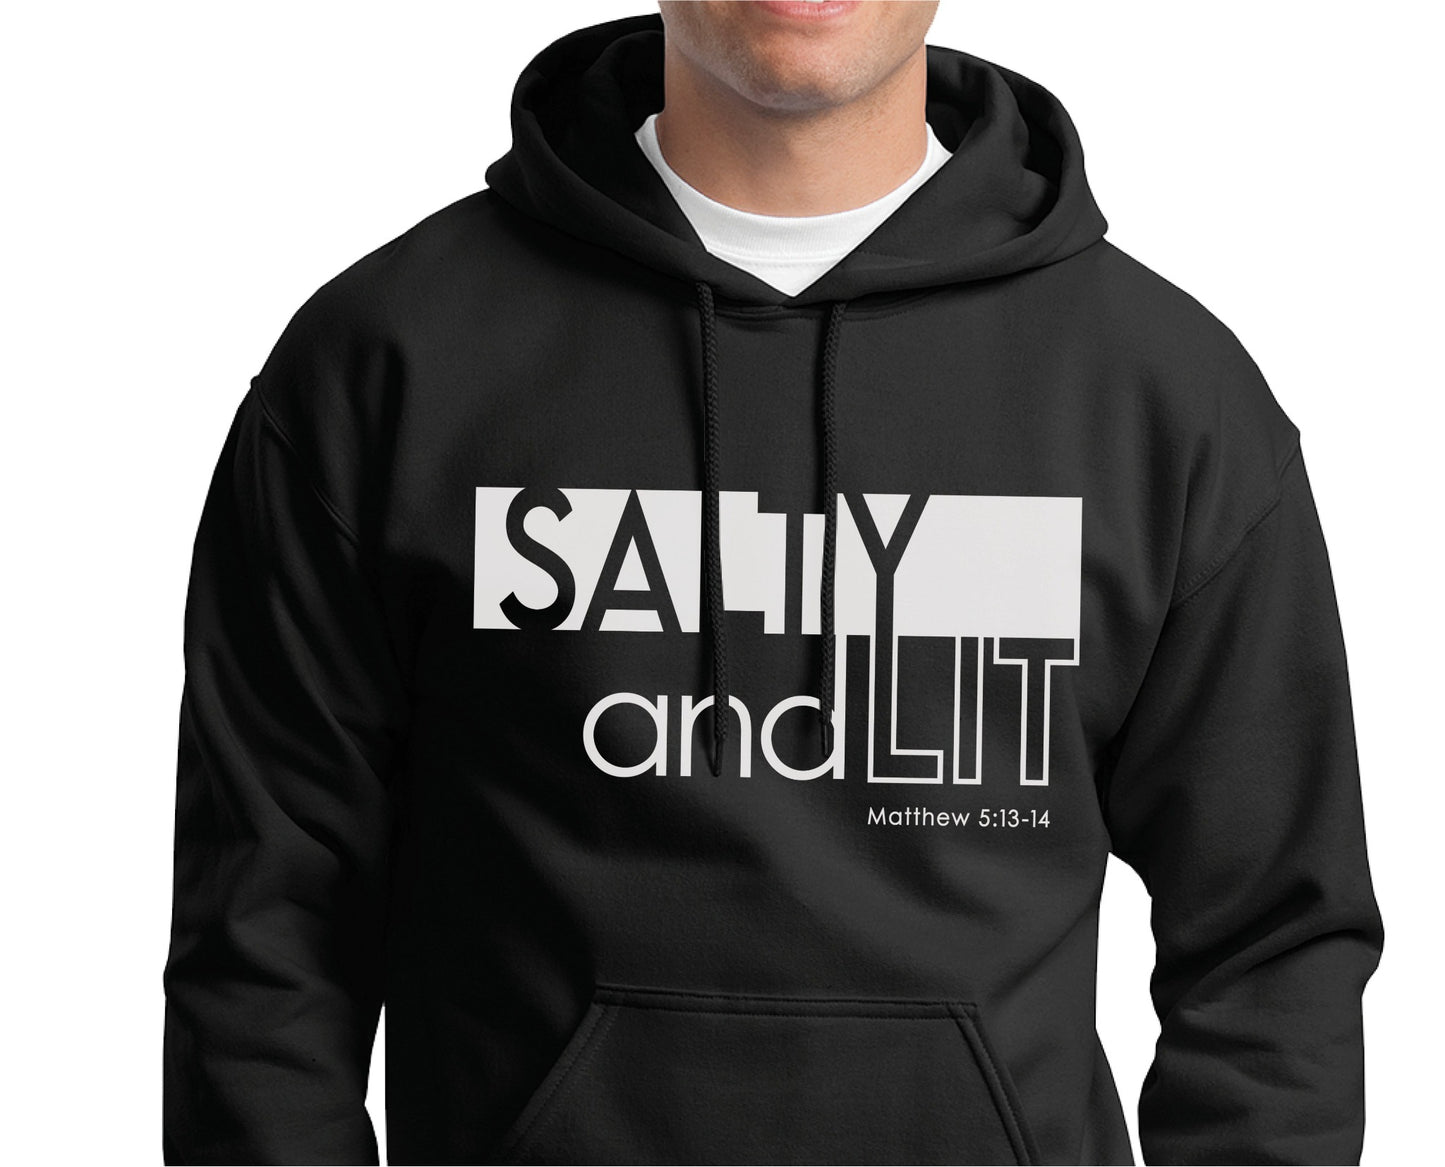 Funny Christian aesthetic Salty And Lit Matthew 5:13-14 bible verse unisex cozy black hoodie for men and women